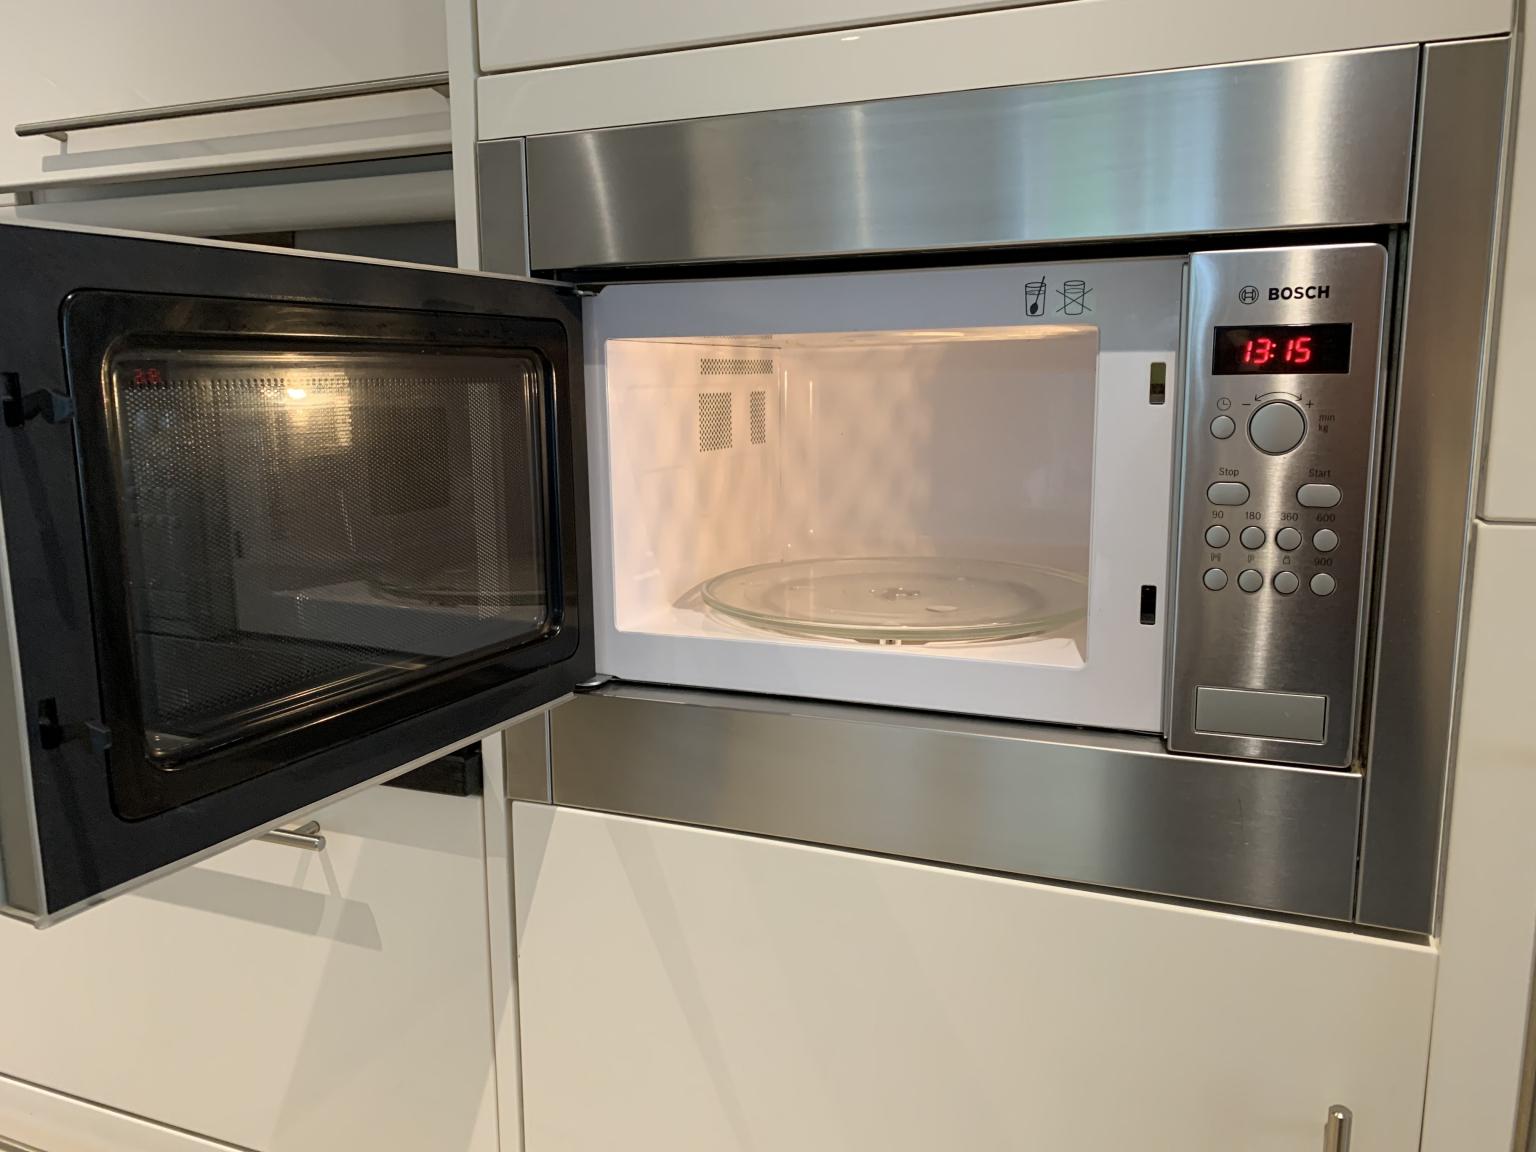 Bosch integrated stainless steel microwave in BS6 Bristol for £25.00